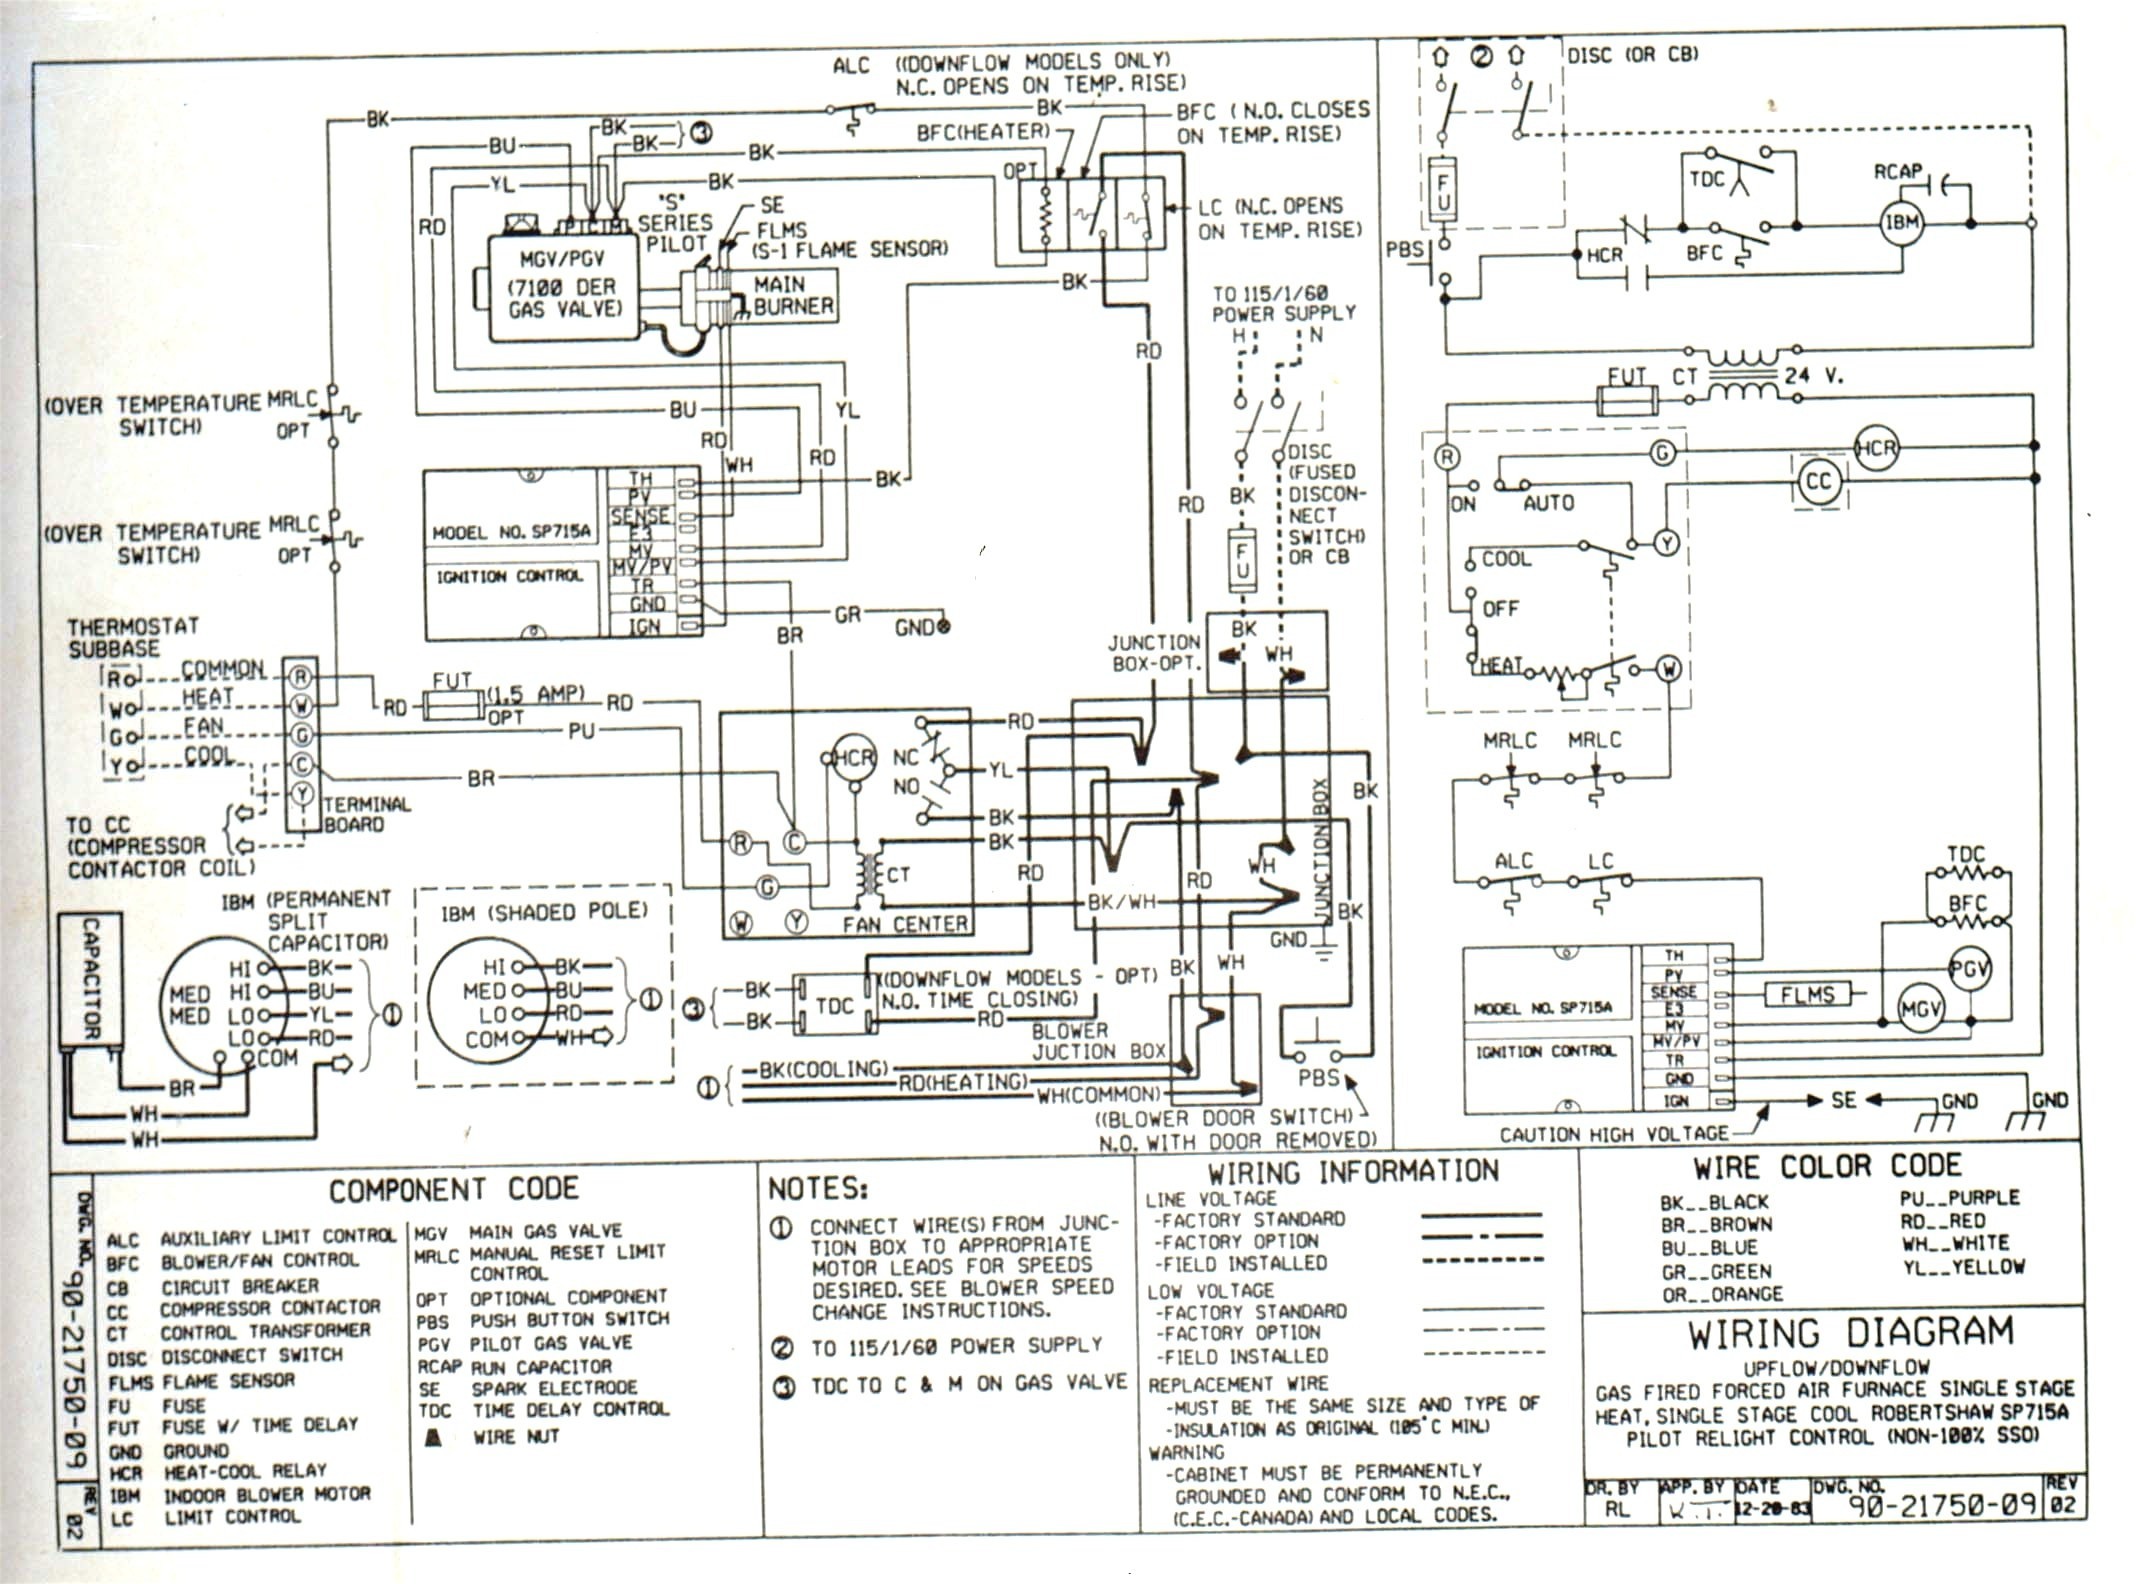 Wiring Diagram for A Honeywell thermostat Honeywell Digital thermostat Wiring Diagram None Of Wiring Diagram for A Honeywell thermostat